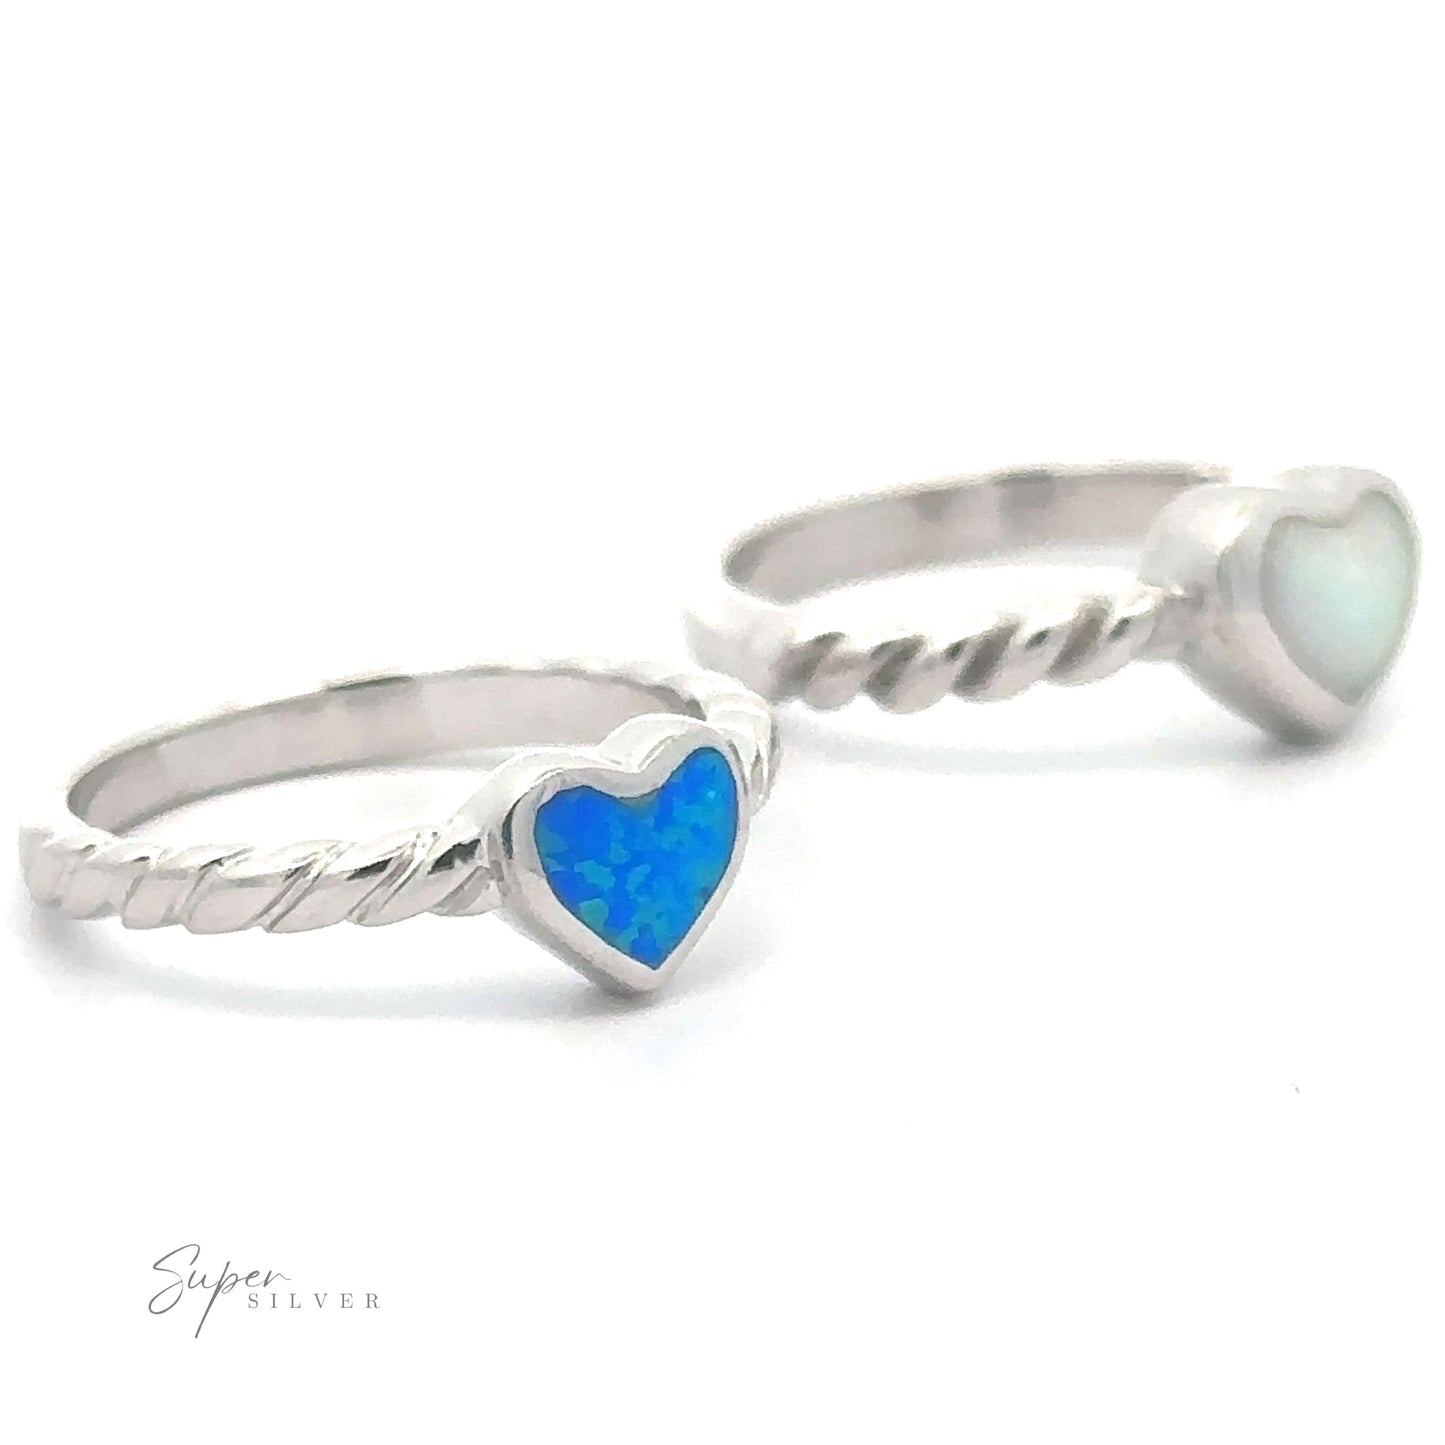 Two Lab Opal Heart Rings with Twisted Bands on a white background.